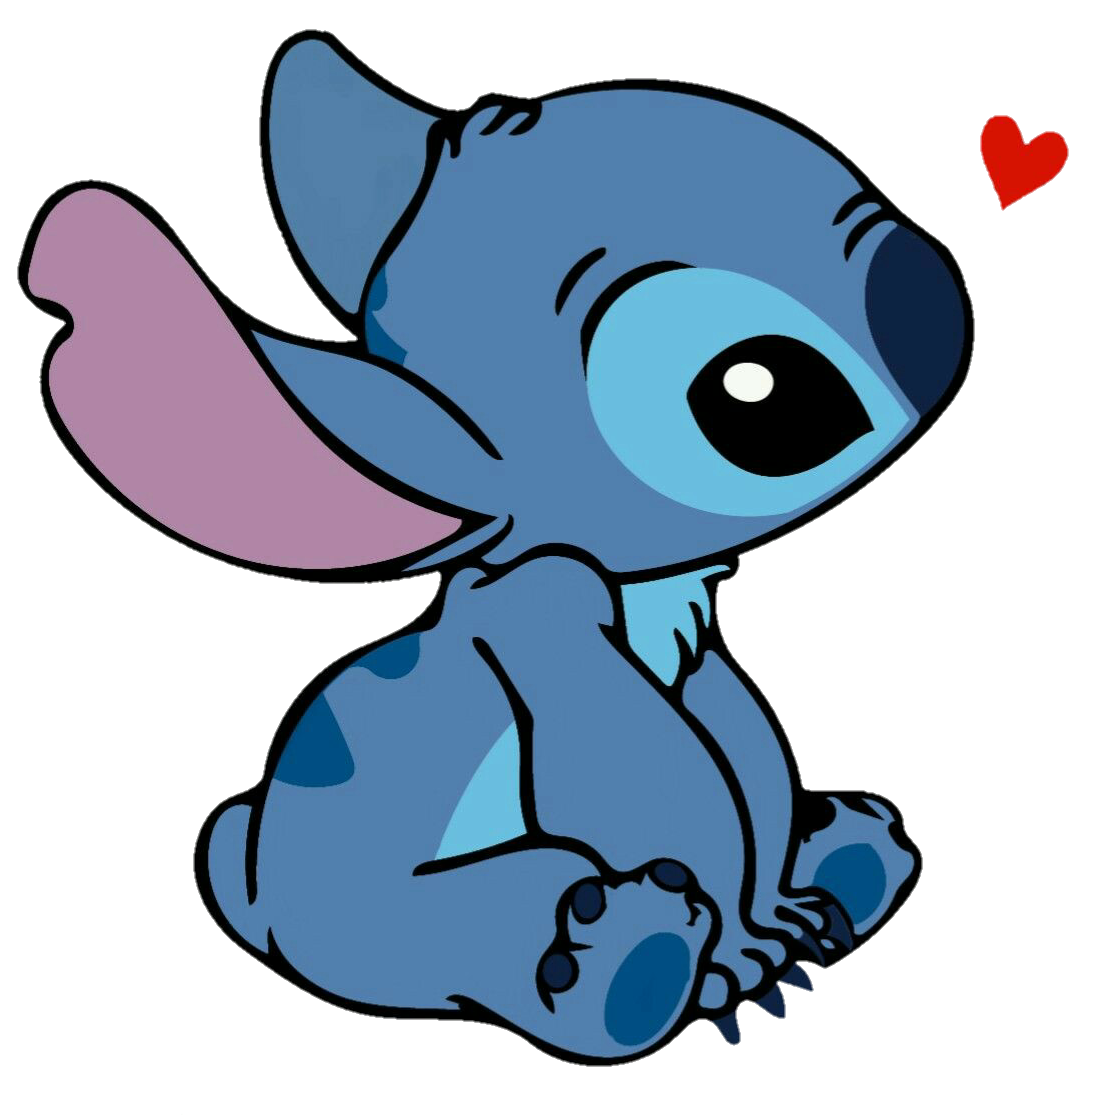 Adorable Cute Stitch Coloring Pages / Stitch colouring page | Stitch ...